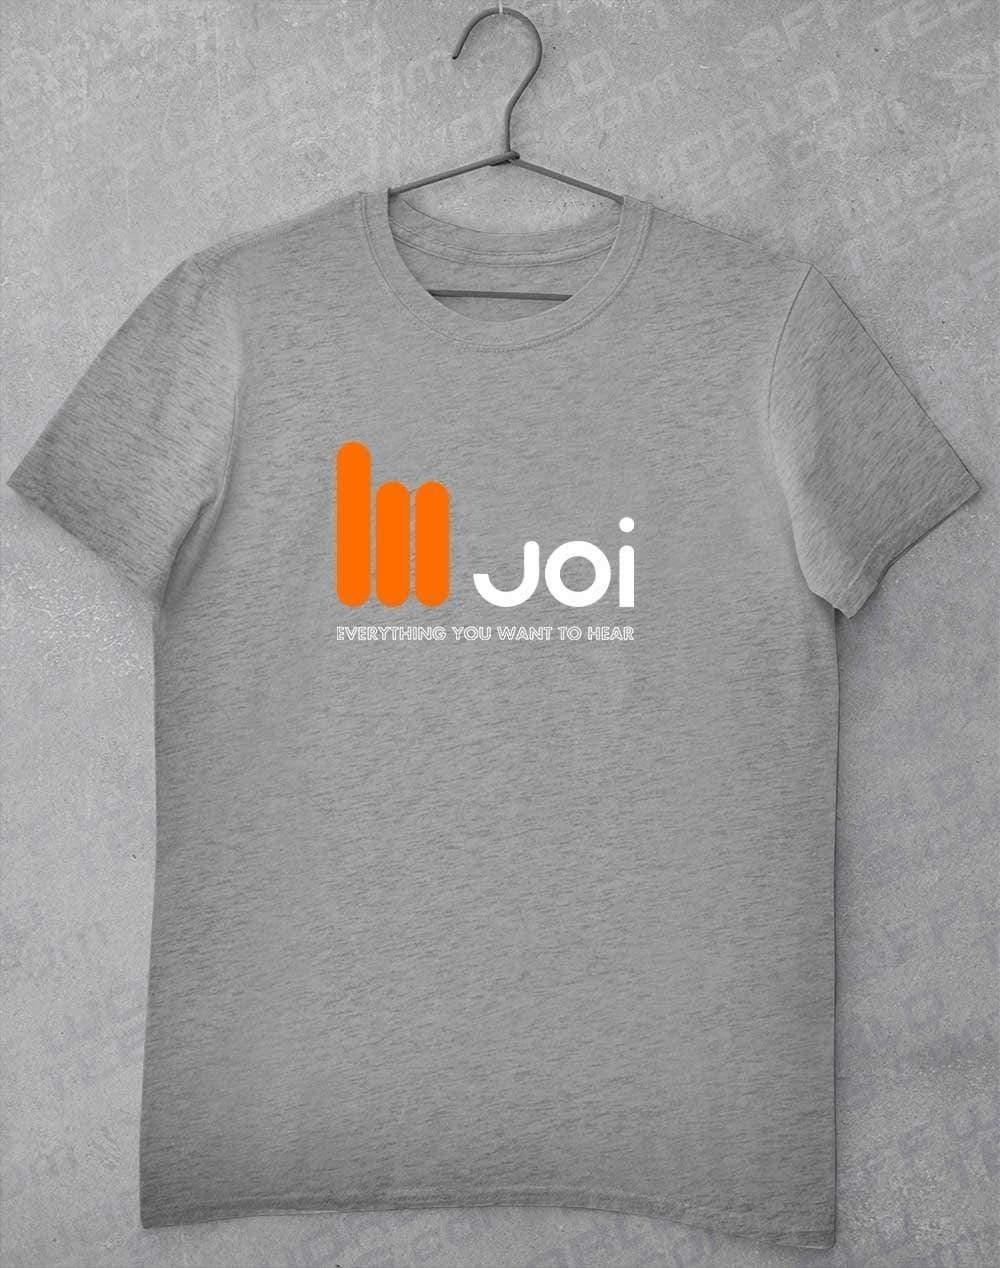 JOI Everything You Want to Hear T-Shirt S / Heather Grey  - Off World Tees